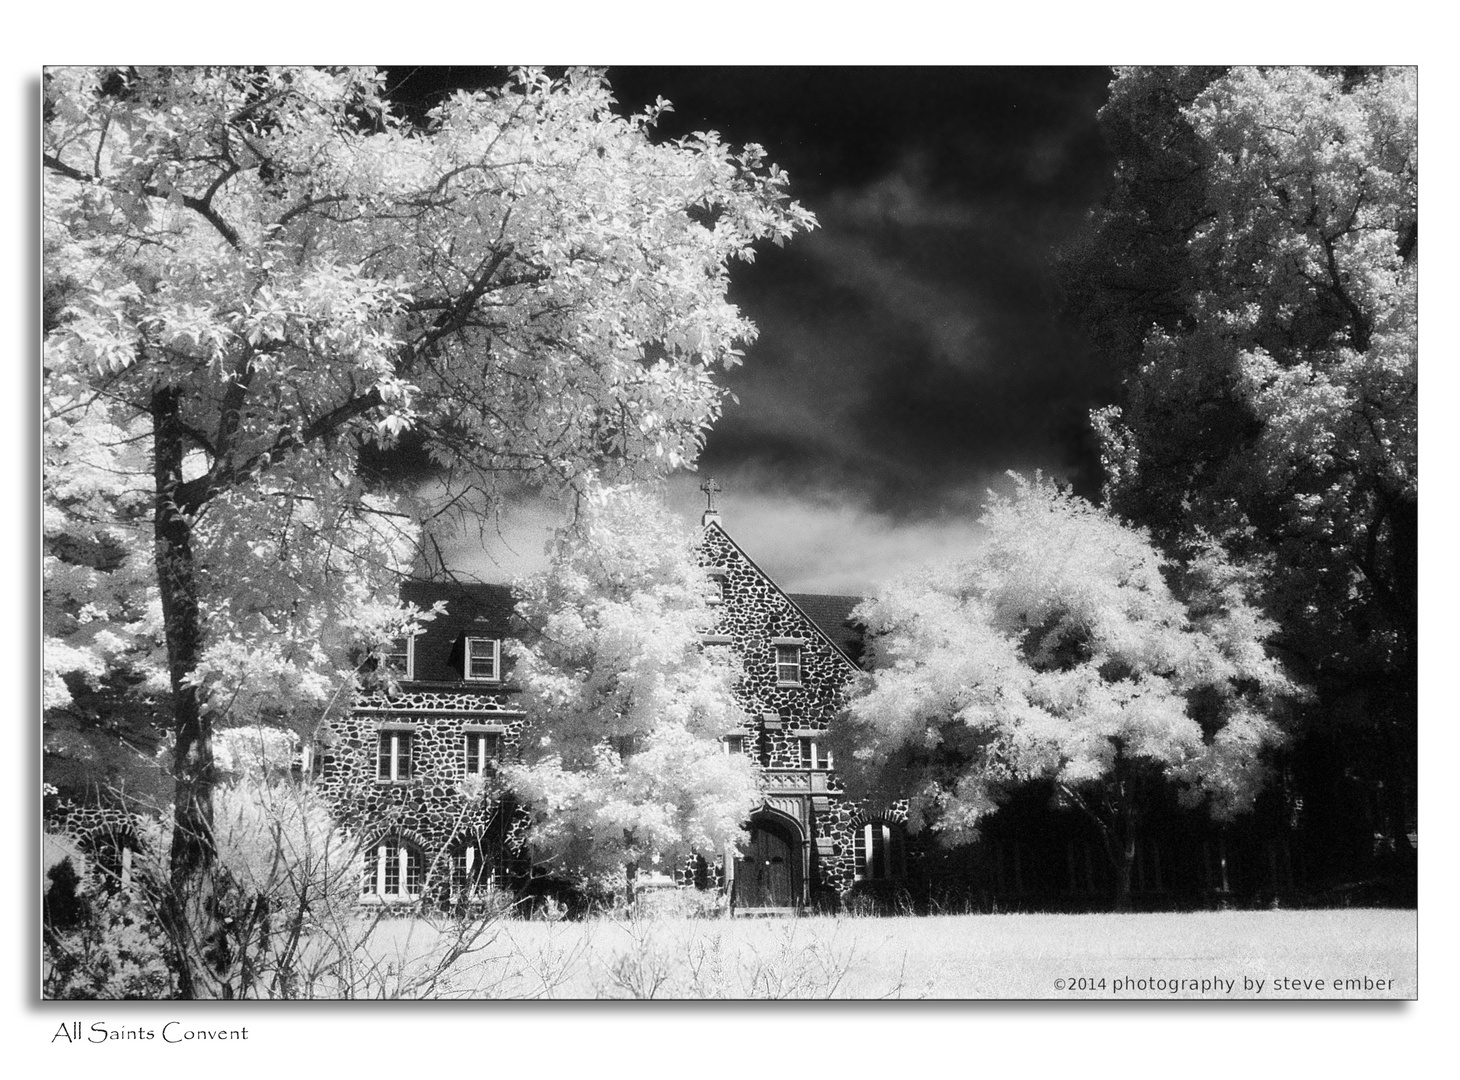 All Saints Convent No.1 (Infrared)